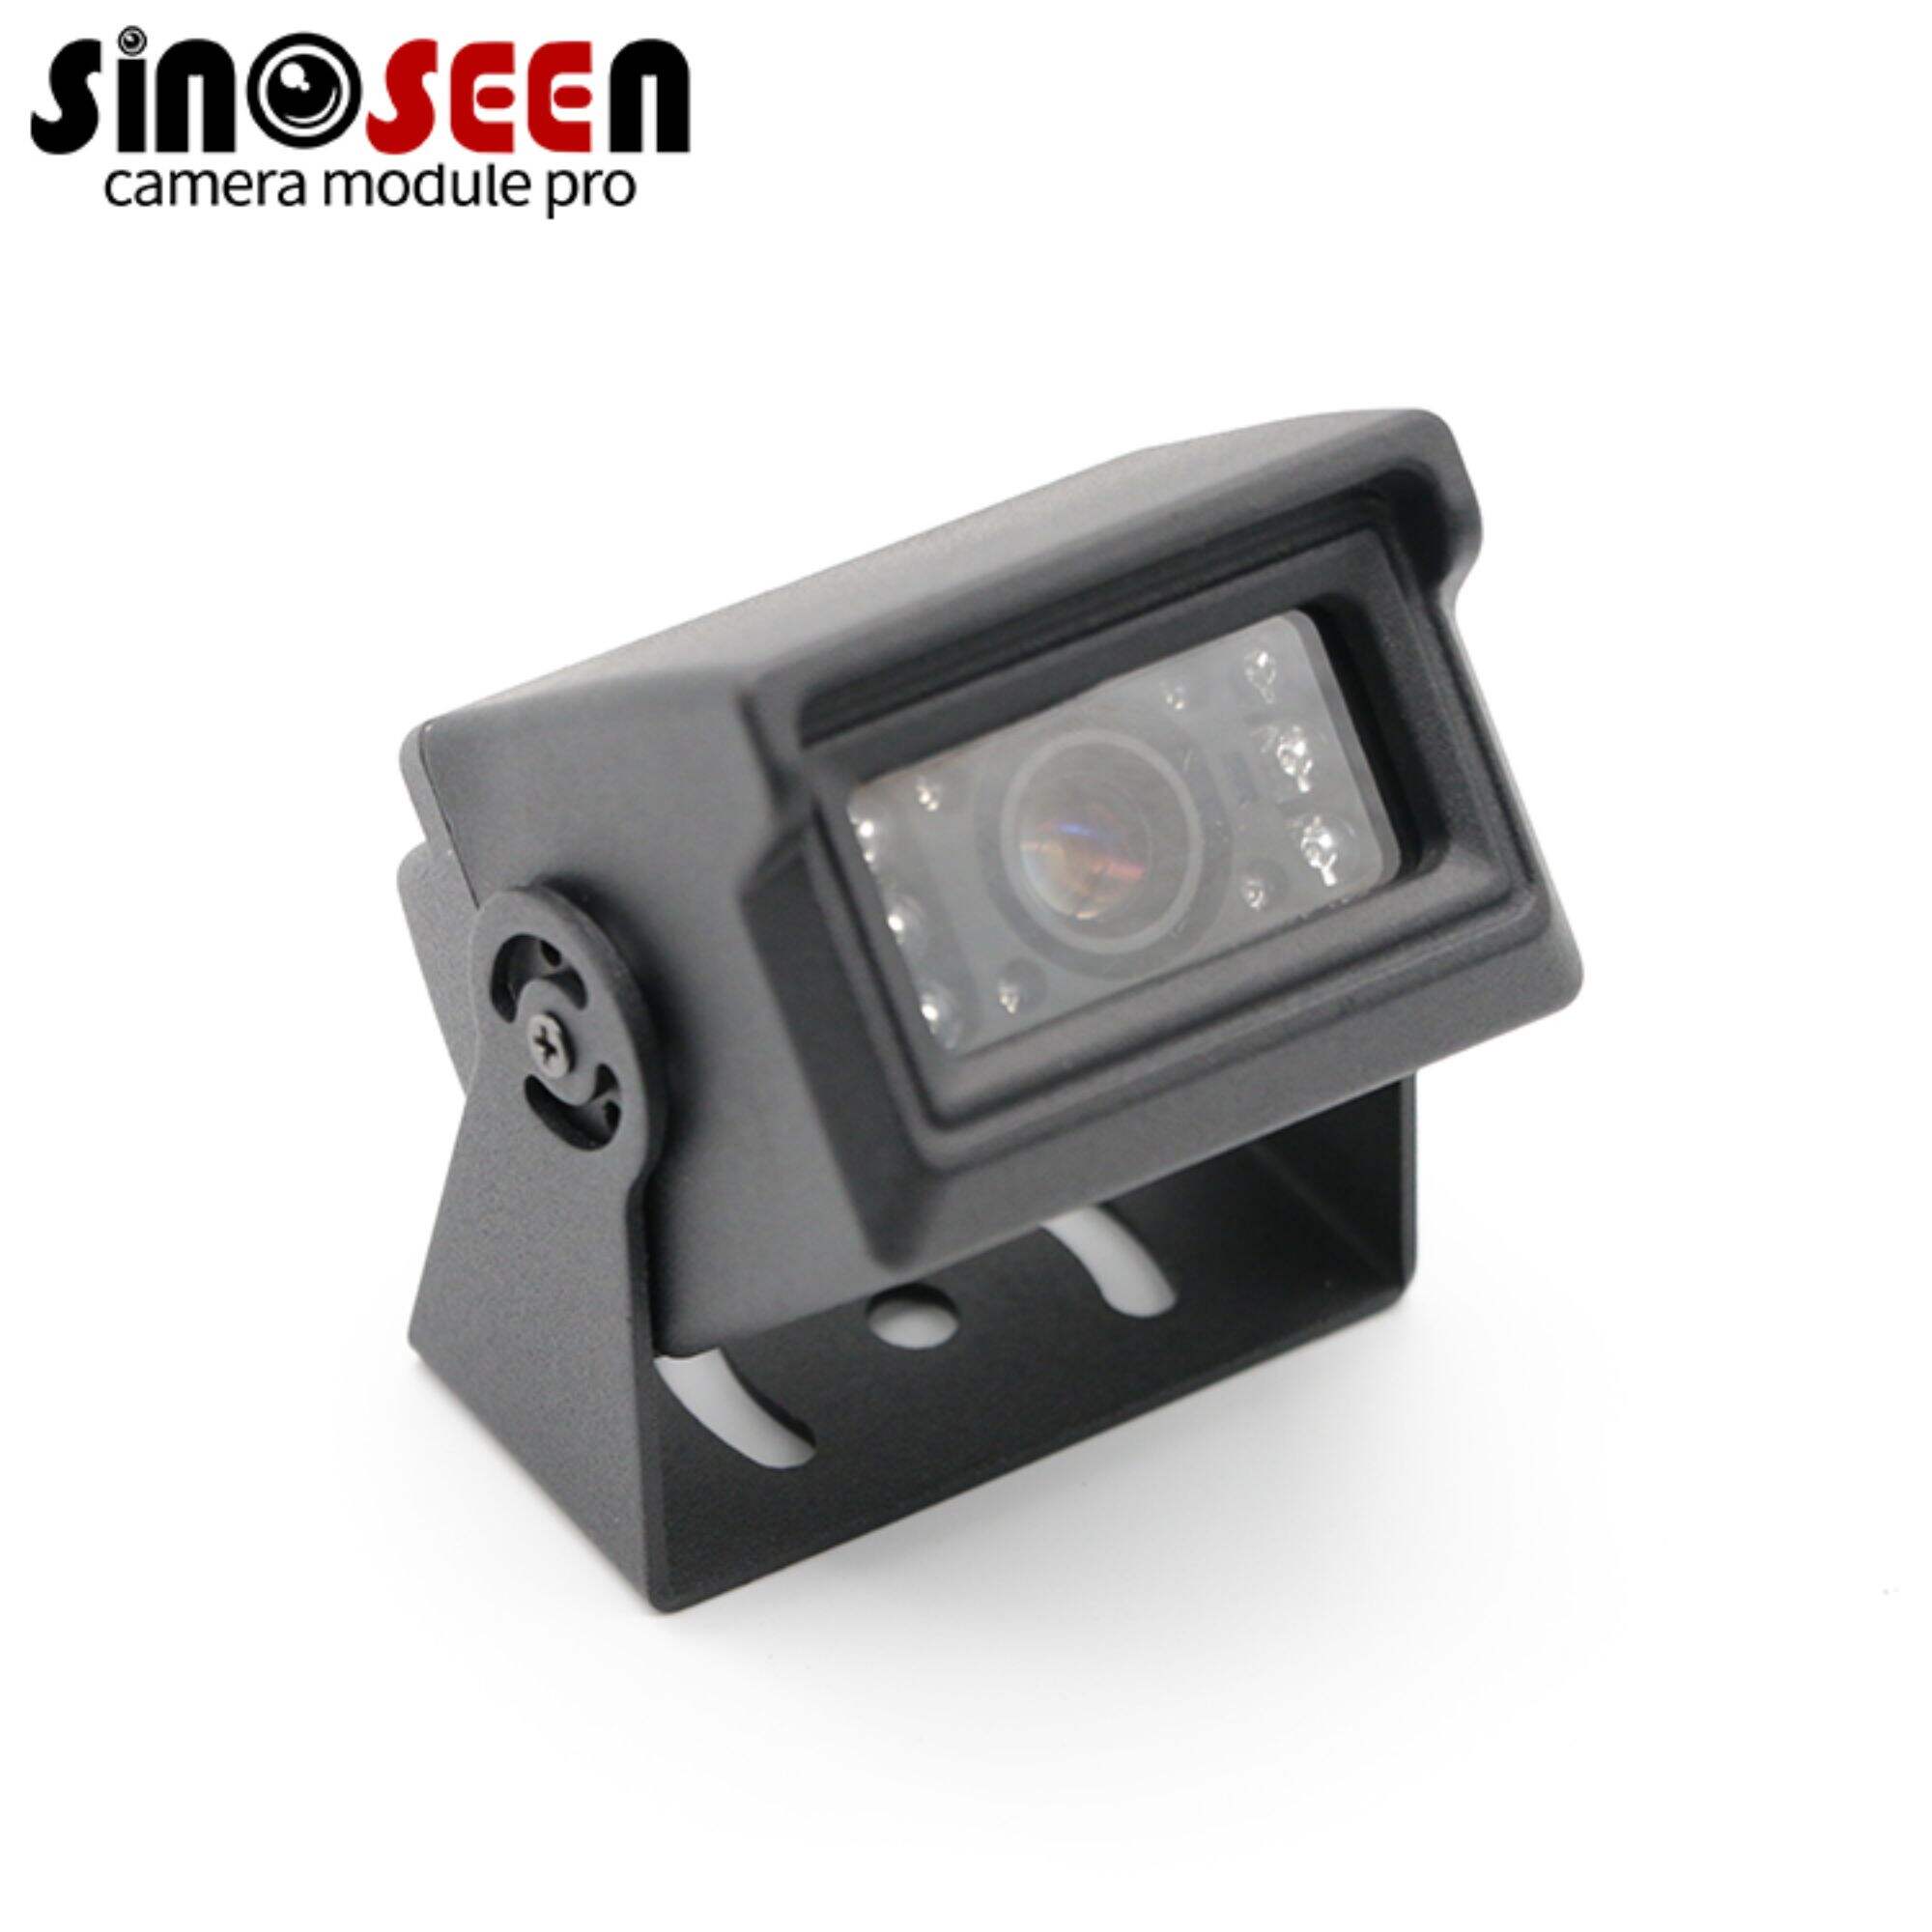 High-Speed Imaging Night Vision Camera for Industrial And Vehicle Surveillance Use OV9712